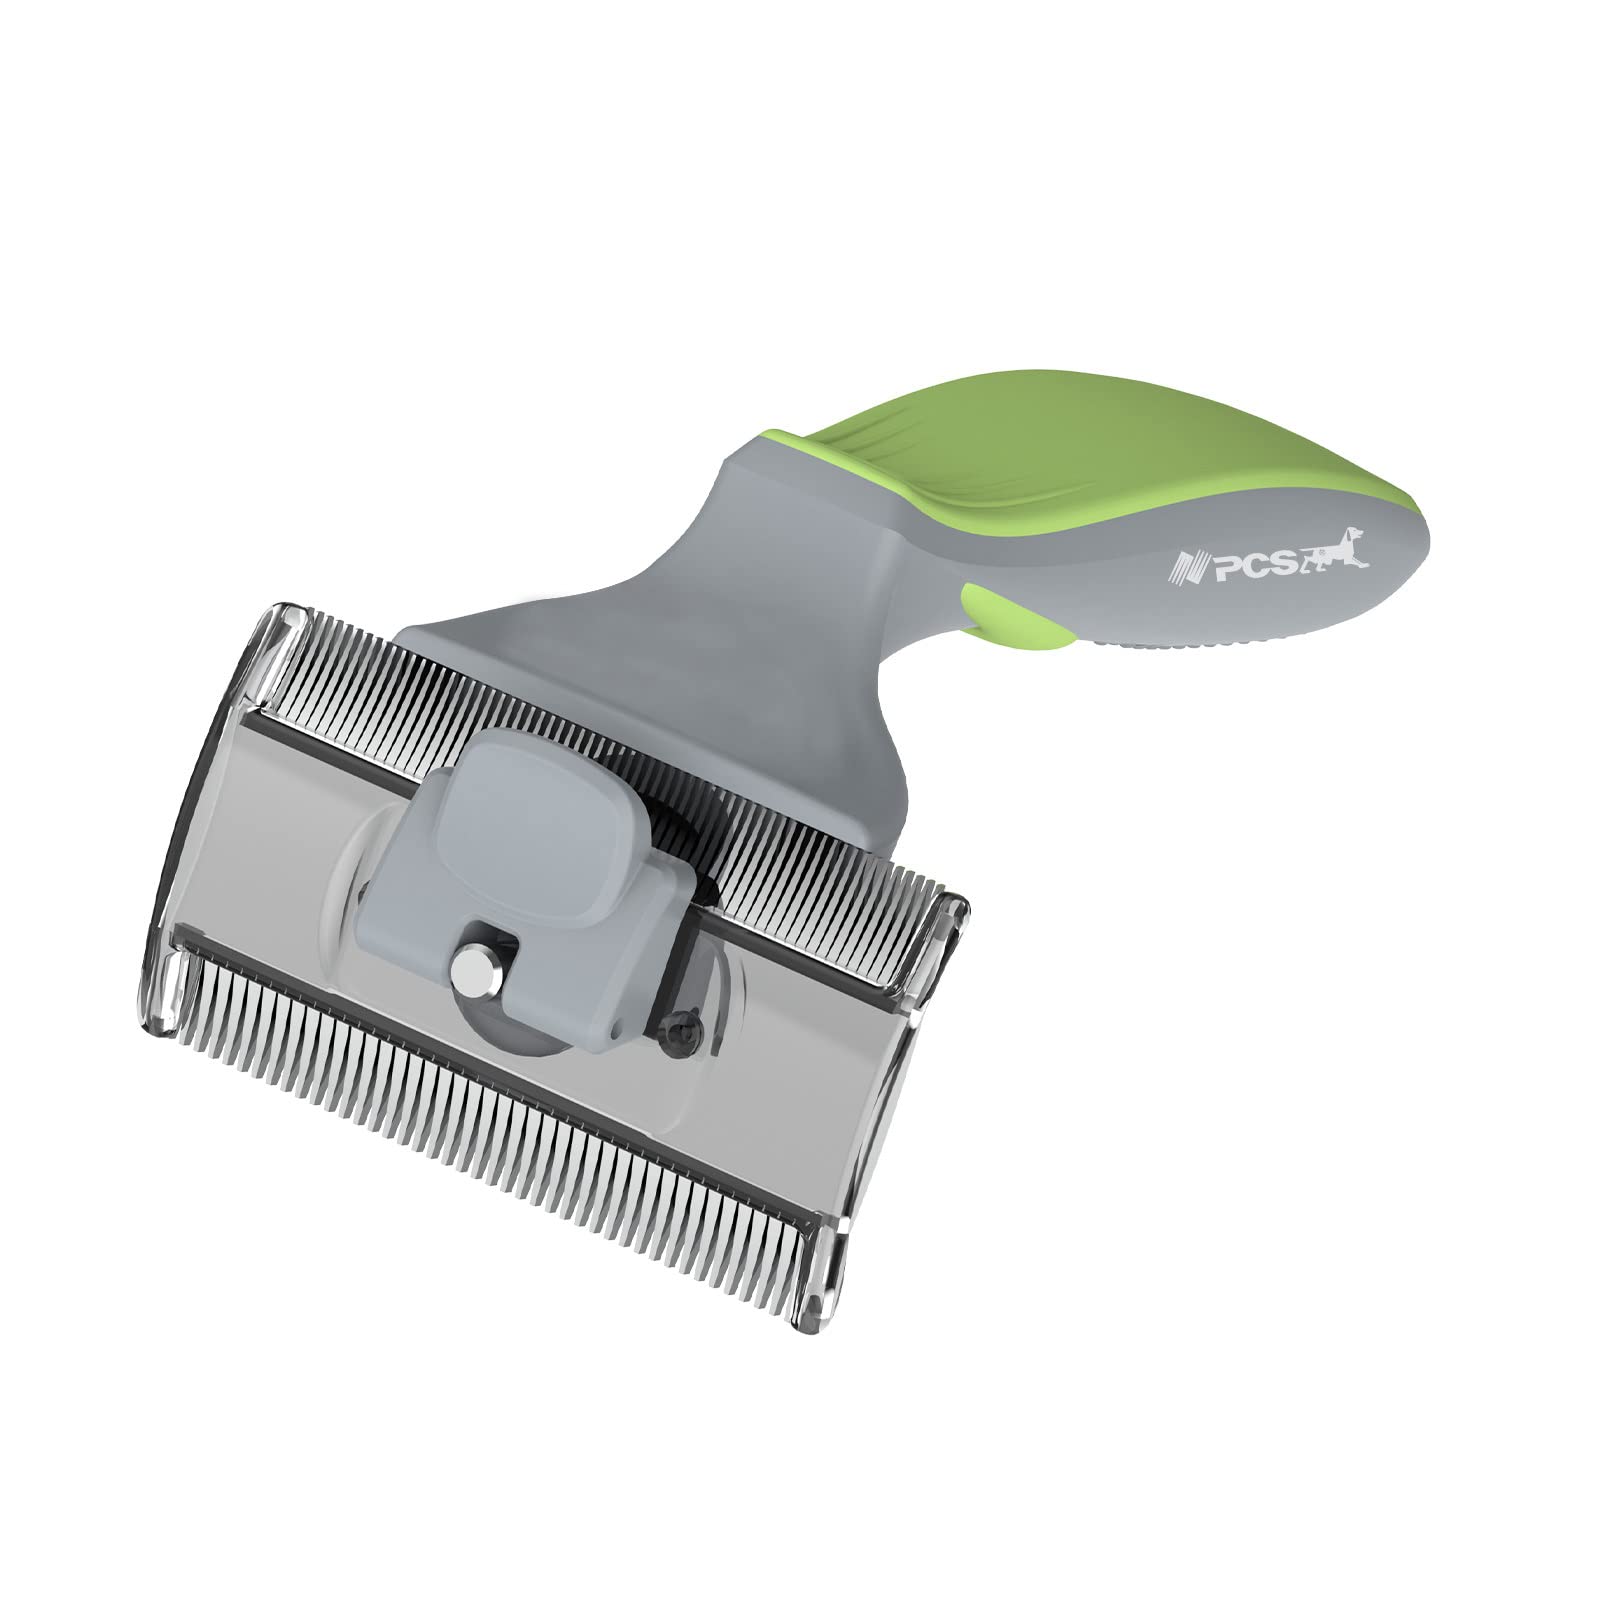 Pcs Deshedding Brush, Deshedding Brush Effectively Reduces Shedding By Up To 95, Dual Edge Design With Heavy Duty Stainless Stee